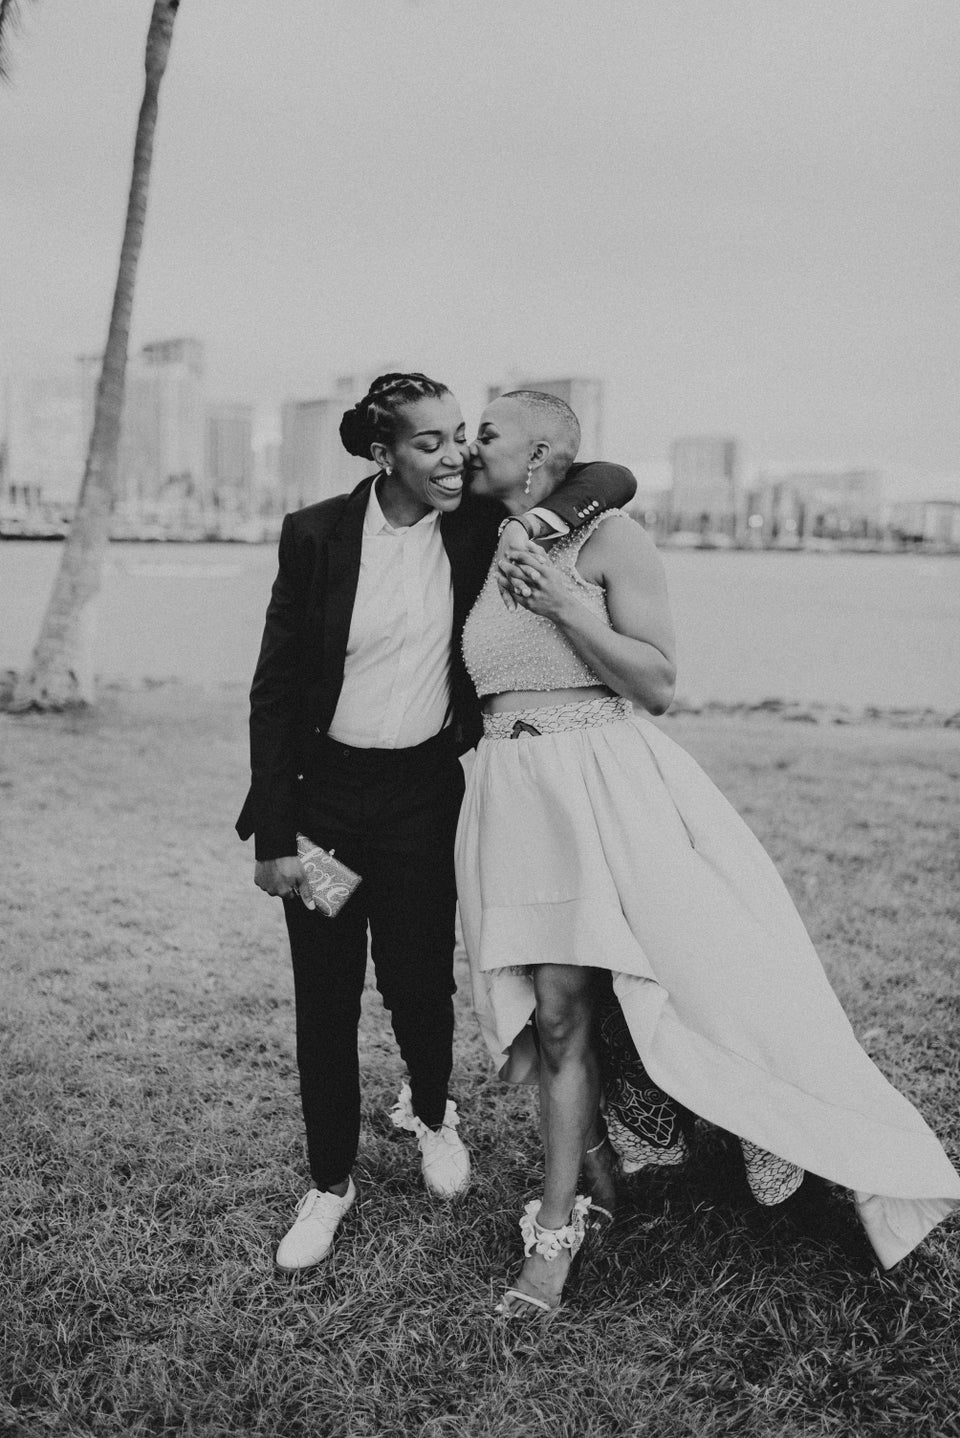 Bridal Bliss: Brandi and Tia Eloped In Hawaii and Stole Our Hearts